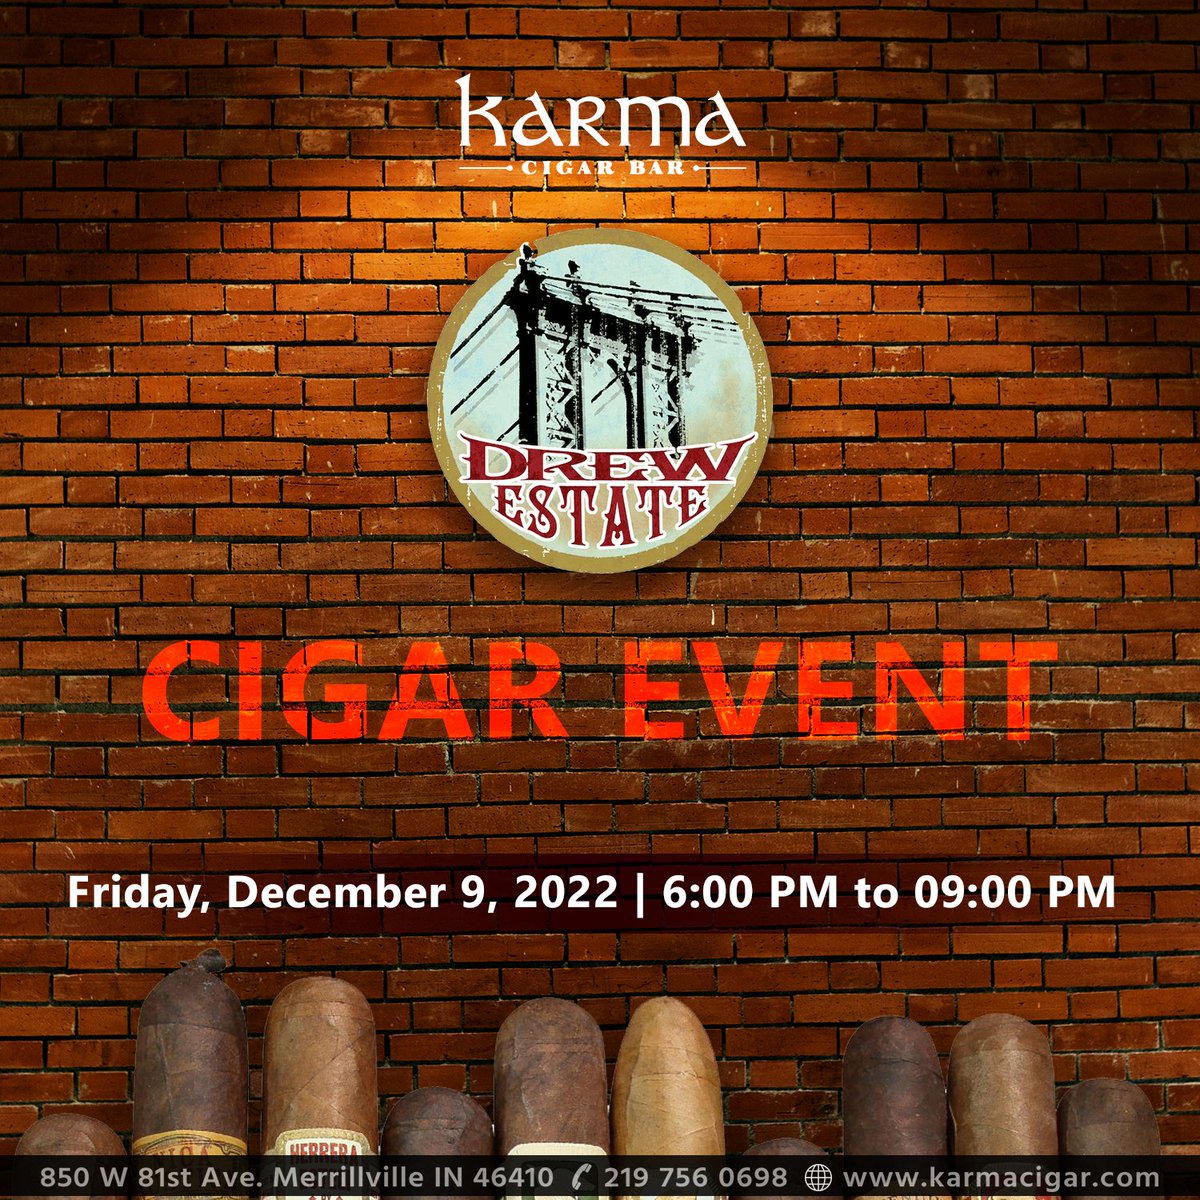 We've got another excellent event for all our customers in December!  It's Drew Estate Cigars!  Ben Pearson, the rep of Drew Estate is heading back to Karma for this event. The event includes exclusive products and promotions, great giveaways, raffles, and fantastic deals. https://t.co/SUER2RxbWb